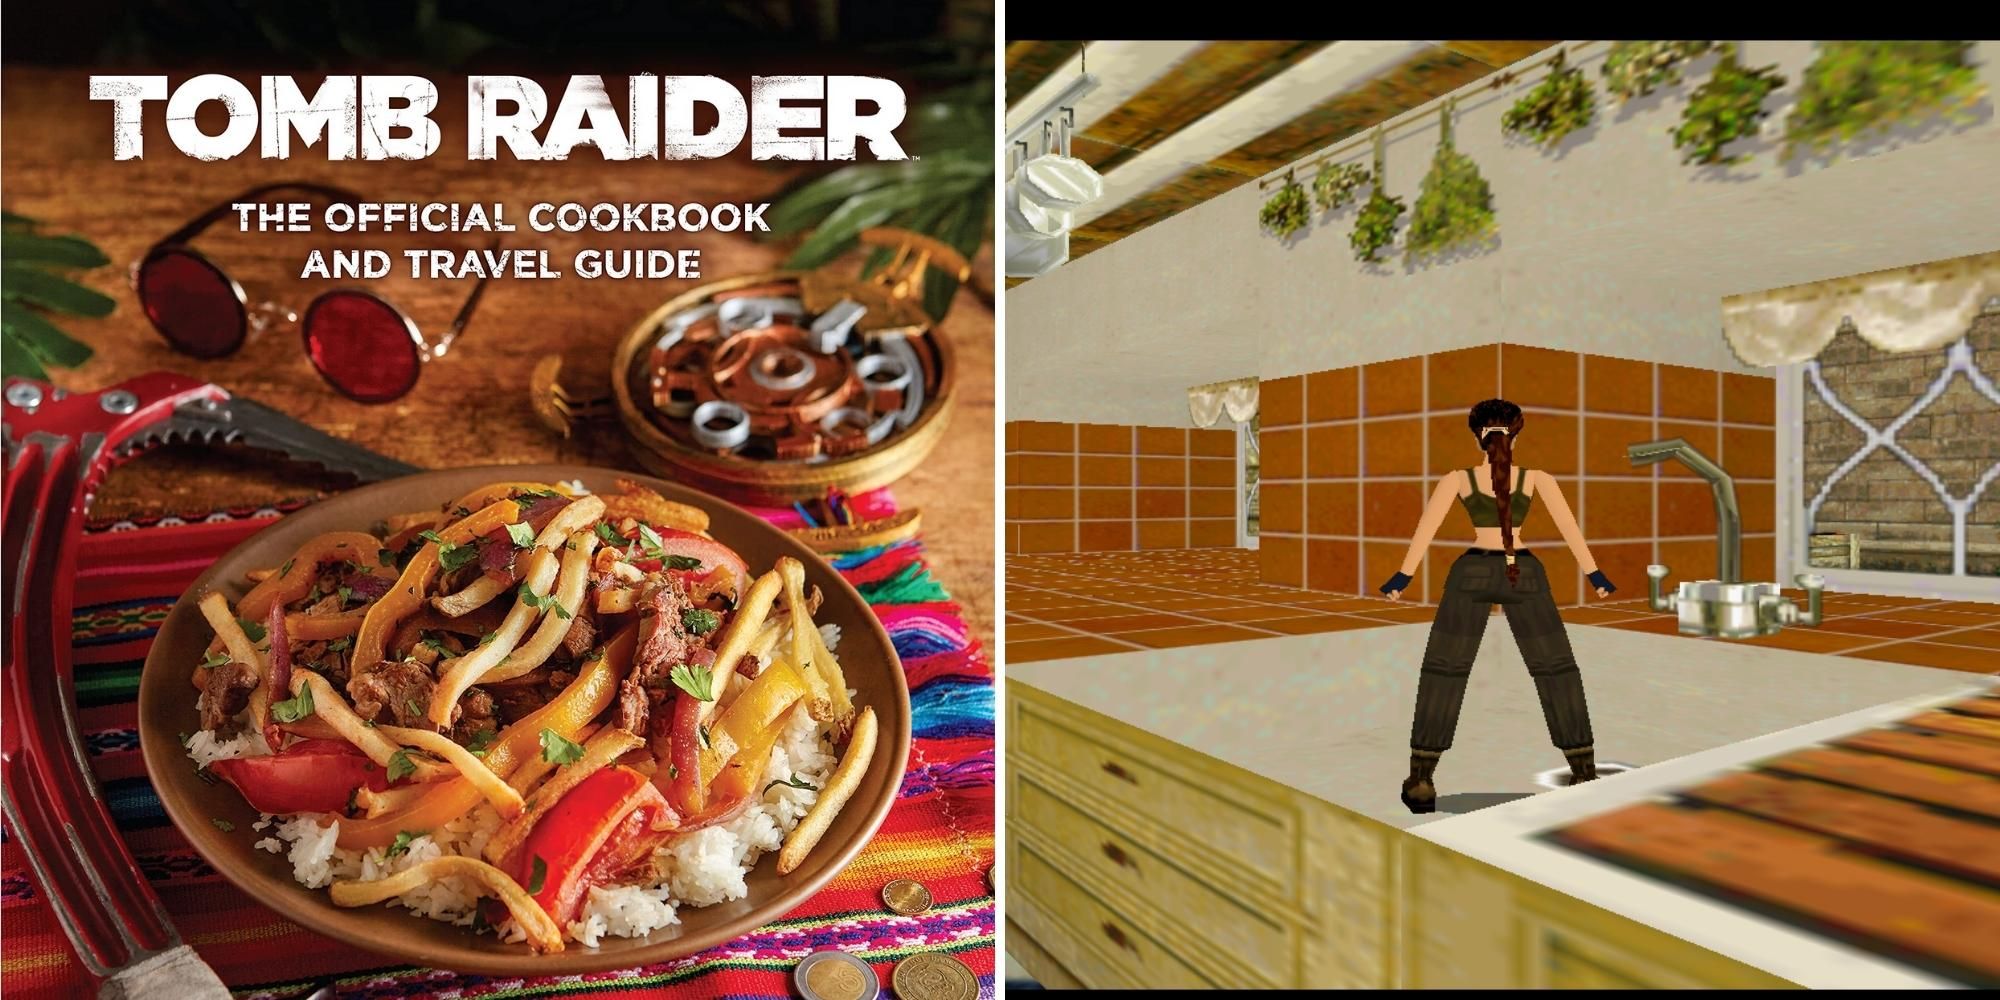 Tomb Raider The Official Cookbook And Travel Guide and game screenshot of Lara in kitchen from Tomb Raider 2